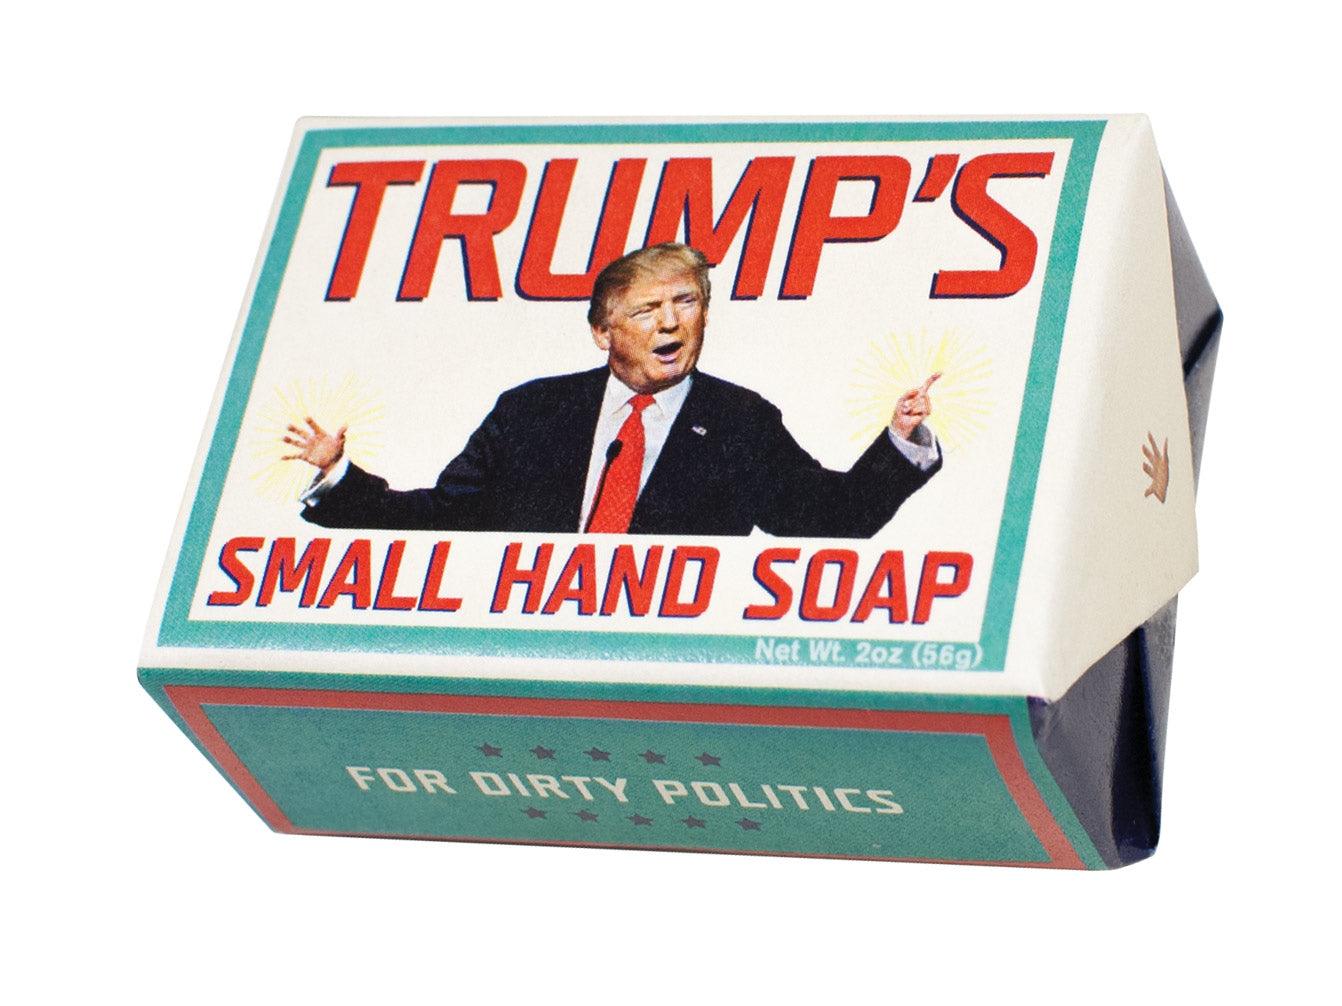 Product photo of Trump's Small Hand Soap, a novelty gift manufactured by The Unemployed Philosophers Guild.